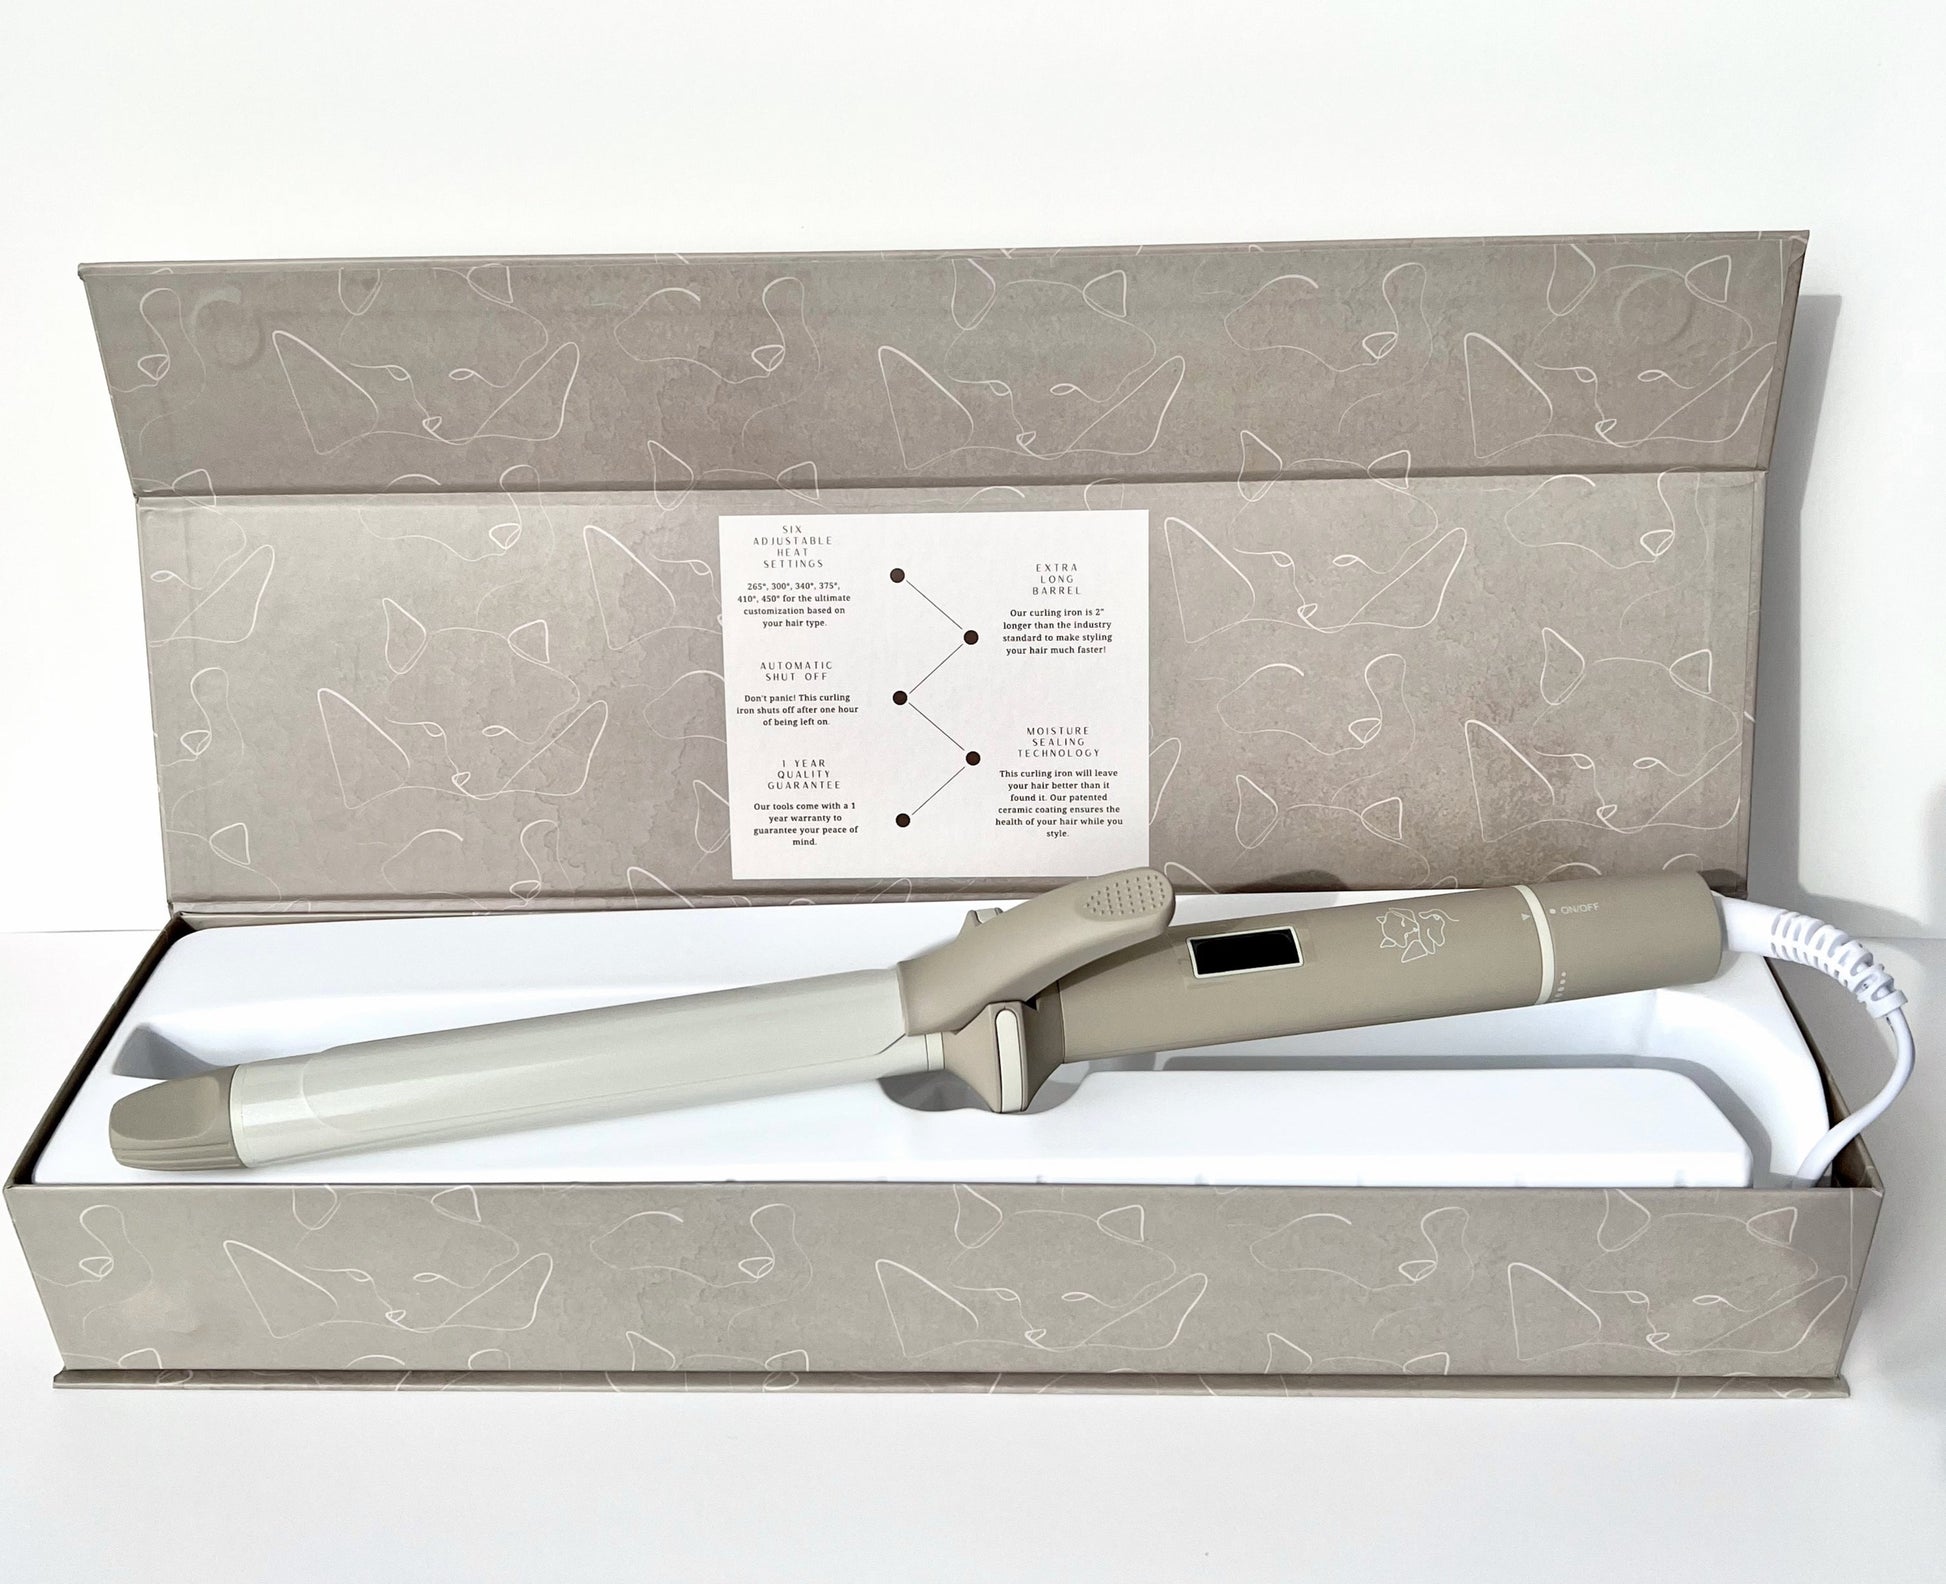 ¾ - 1¼ Nano Ceramic Tapered Curling Iron – Extra-Long